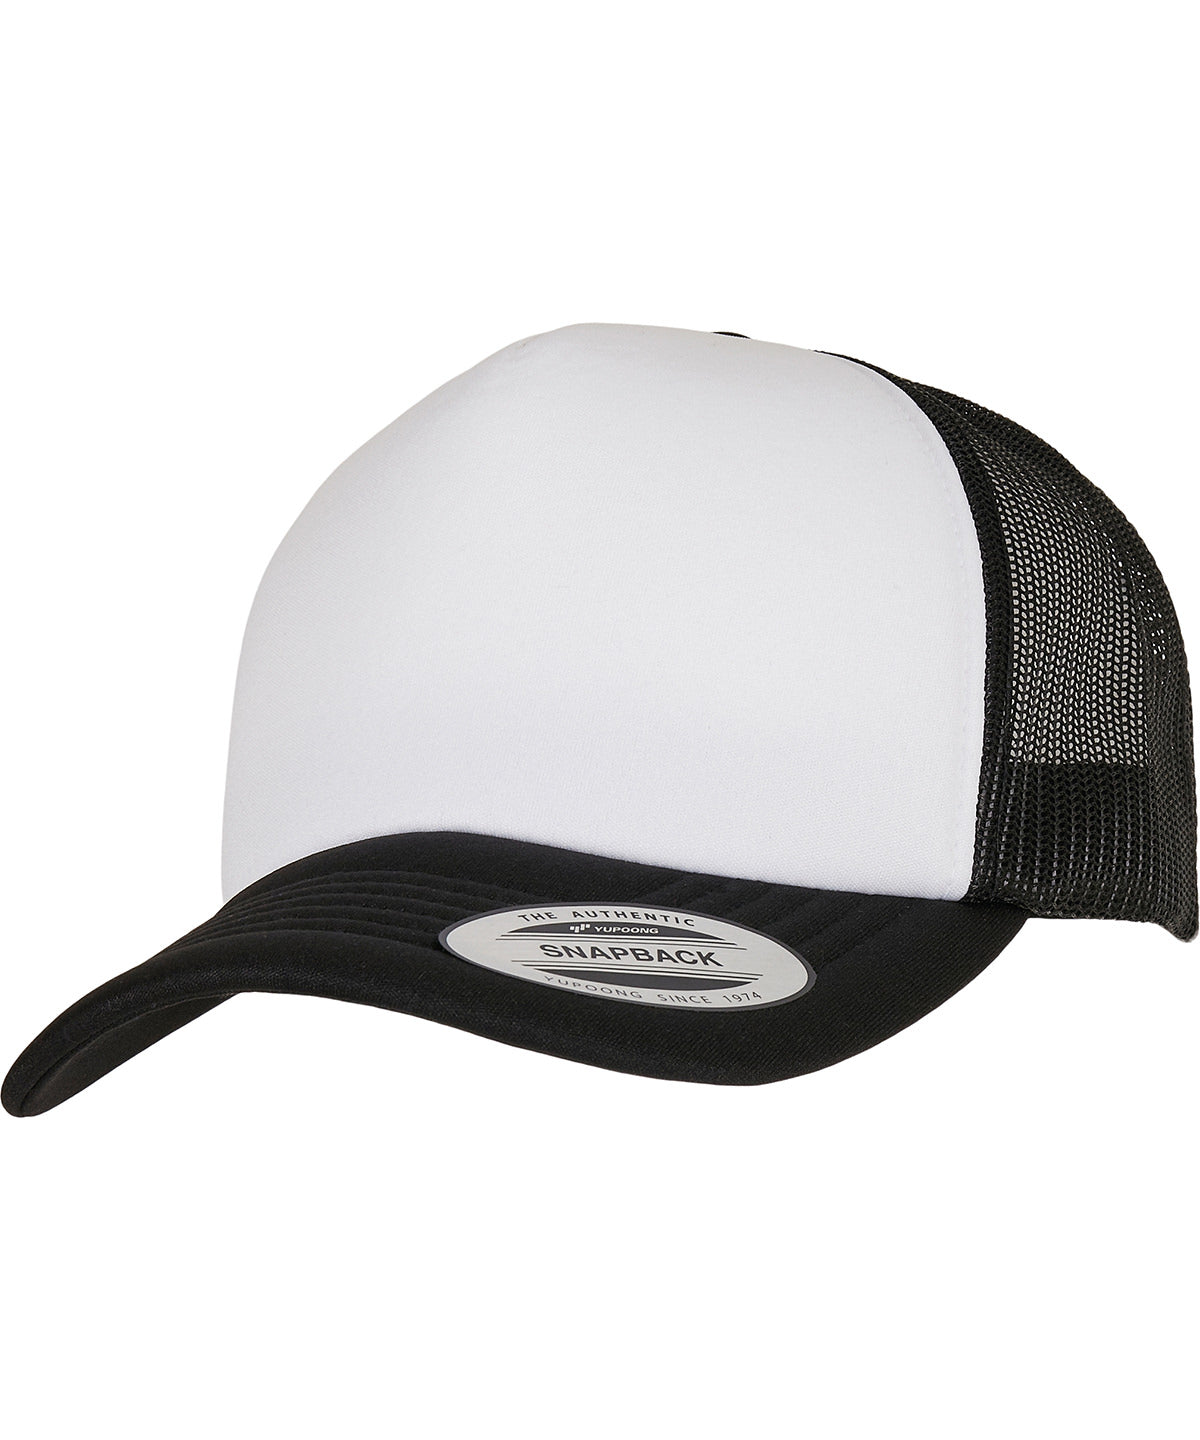 Flexfit by Yupoong YP Classics curved foam trucker cap – white front